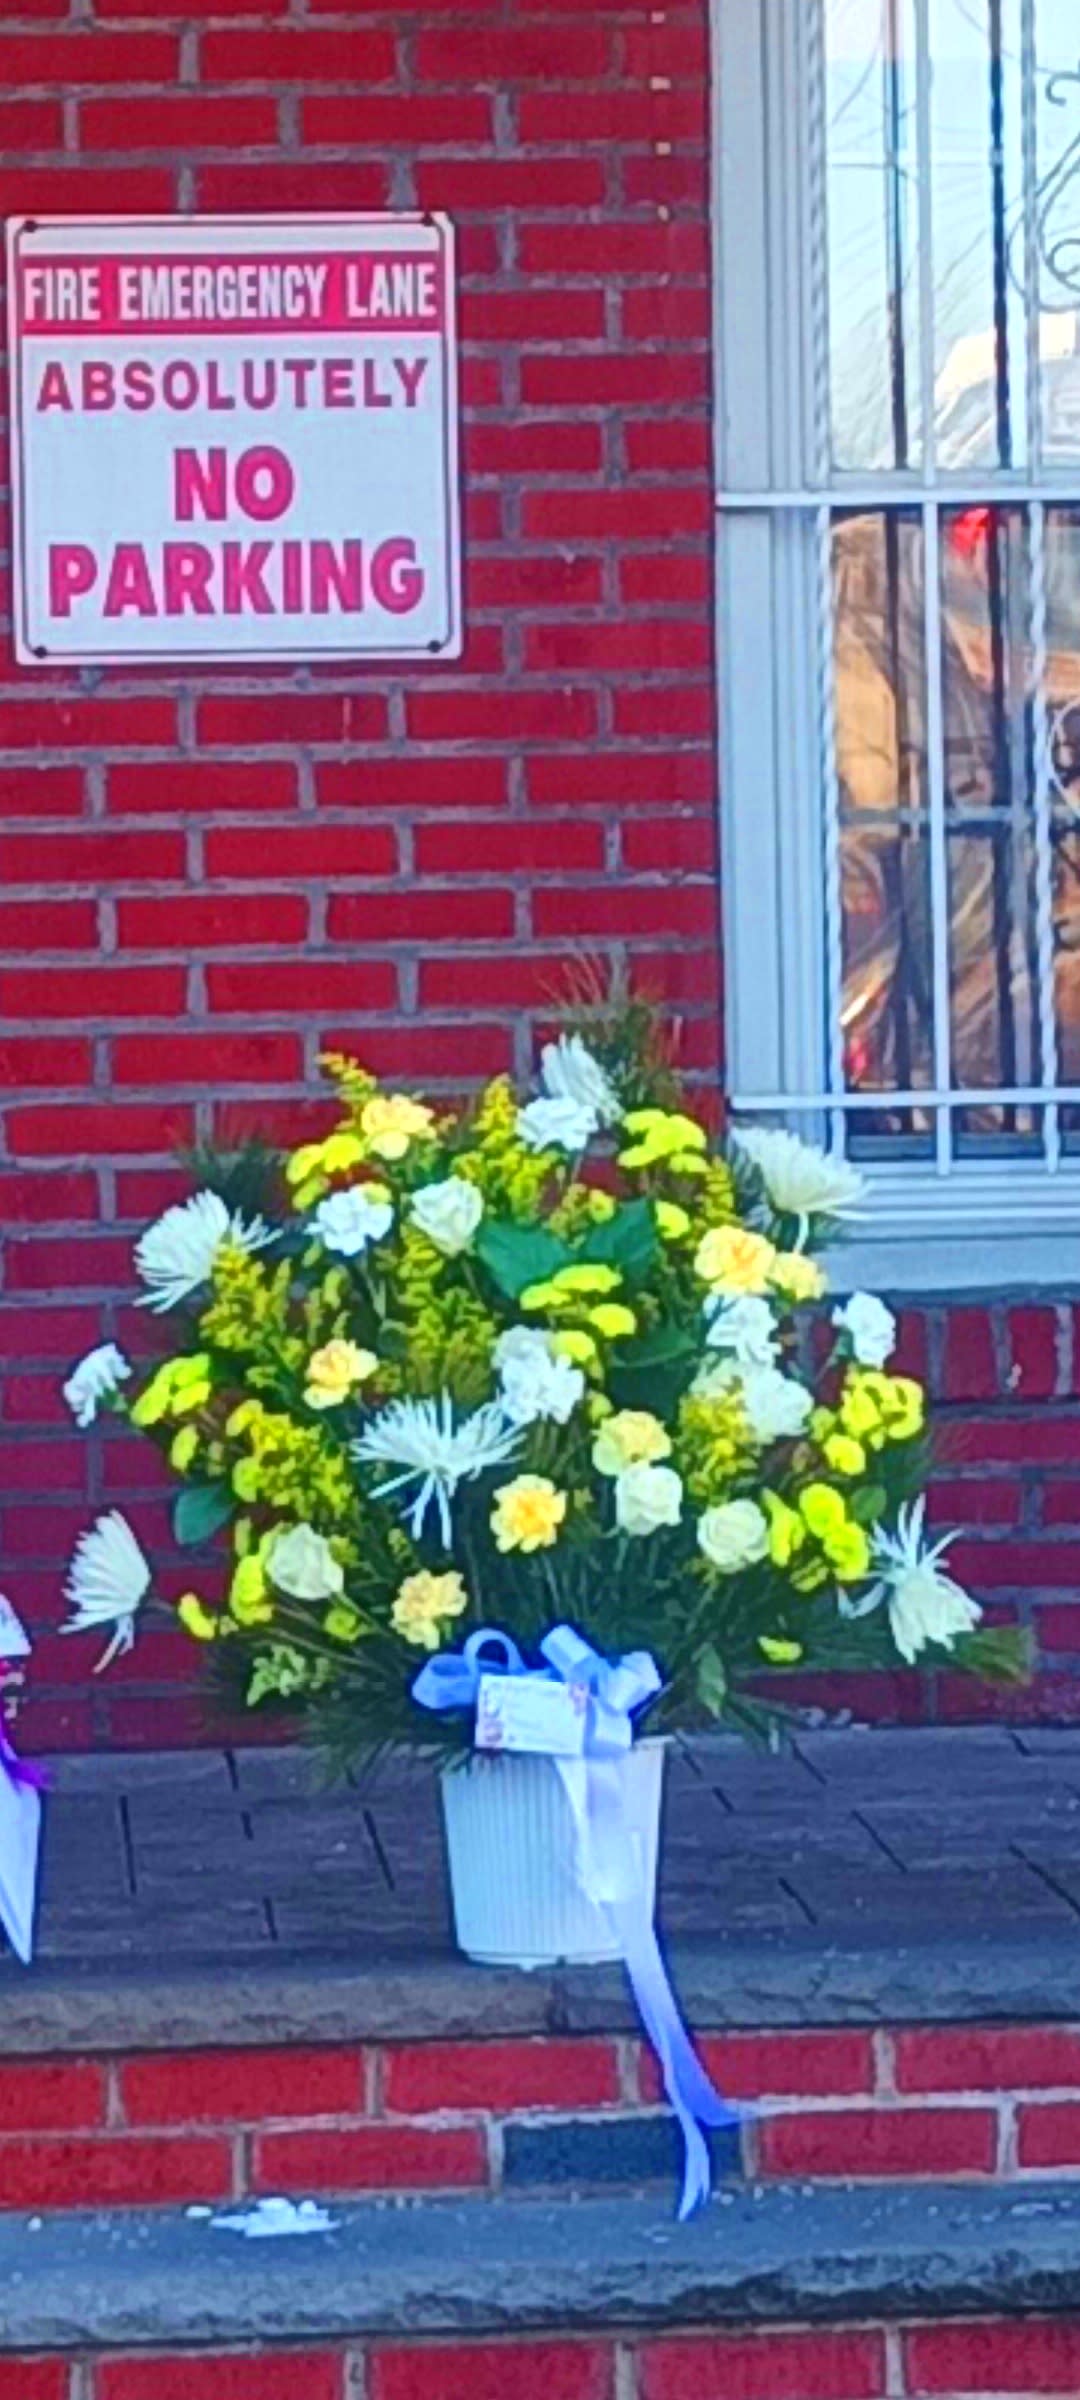 LARGE ONE SIDED FLORAL FUNERAL BASKET OF FLOWERS - Colorful large floral funeral basket of flowers with choice of ribbon bow for the funeral or church service for your loved one.